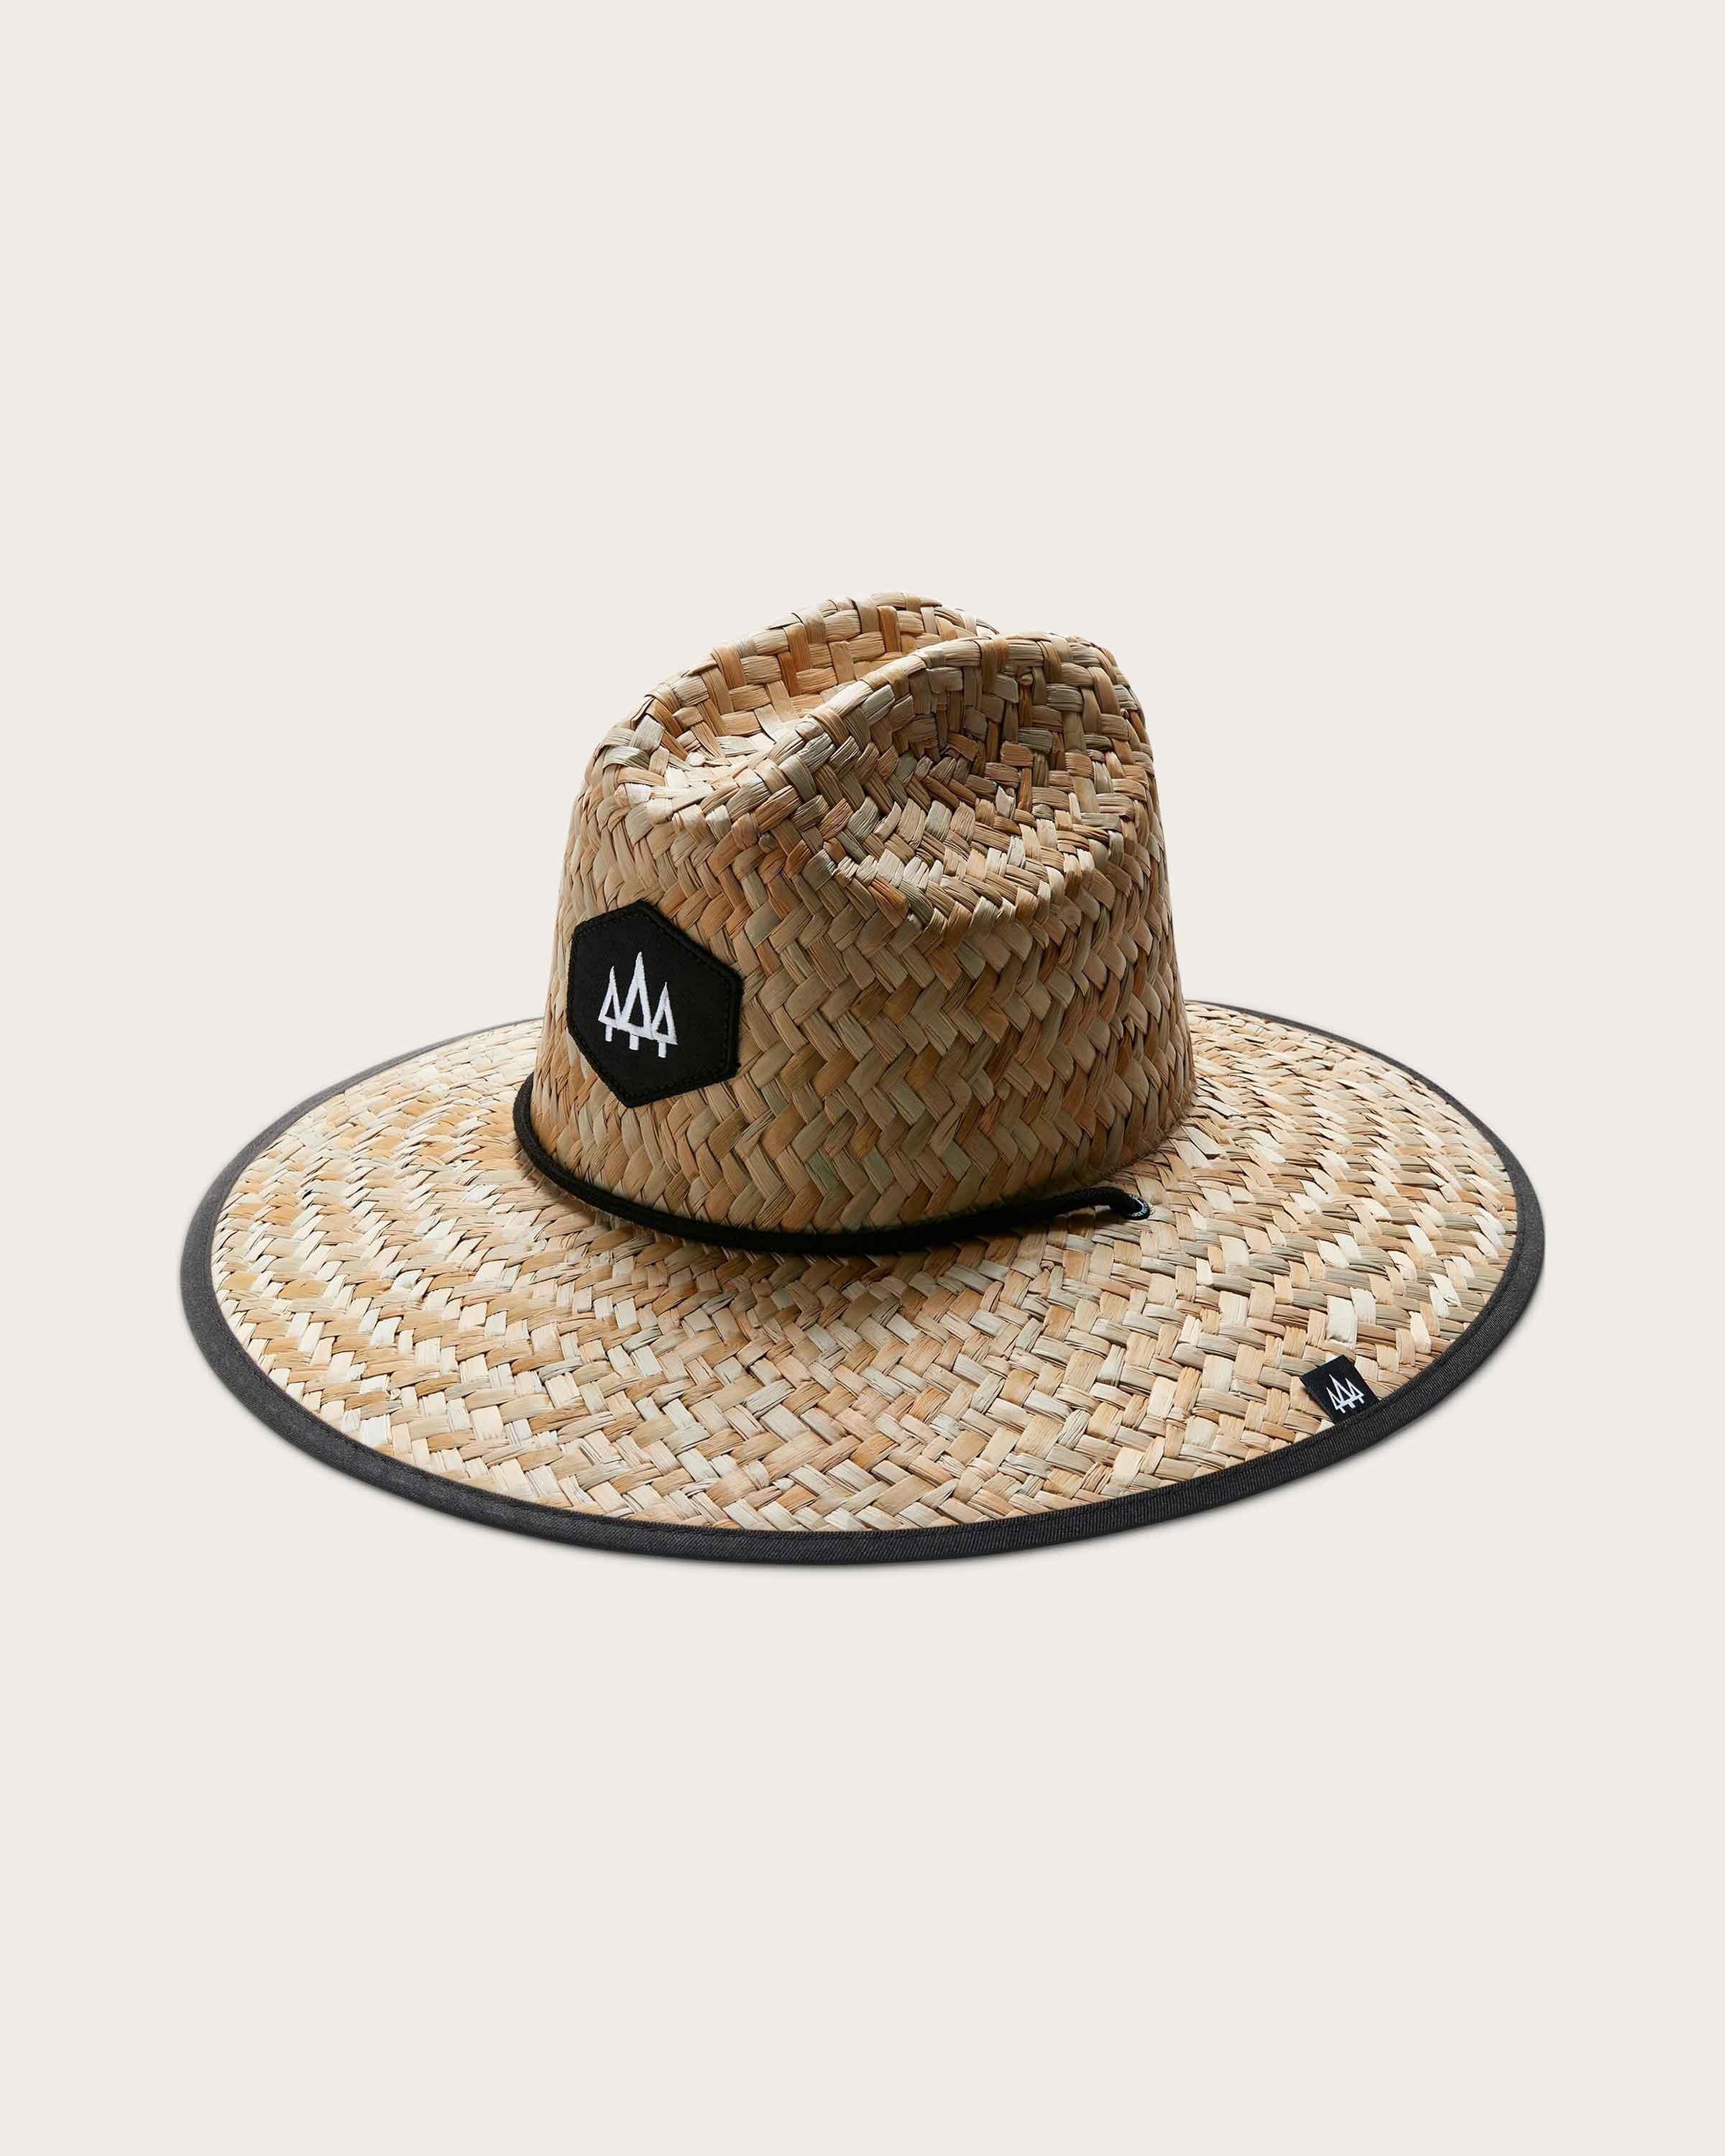 Blackout - undefined - Hemlock Hat Co. Lifeguards - Adults